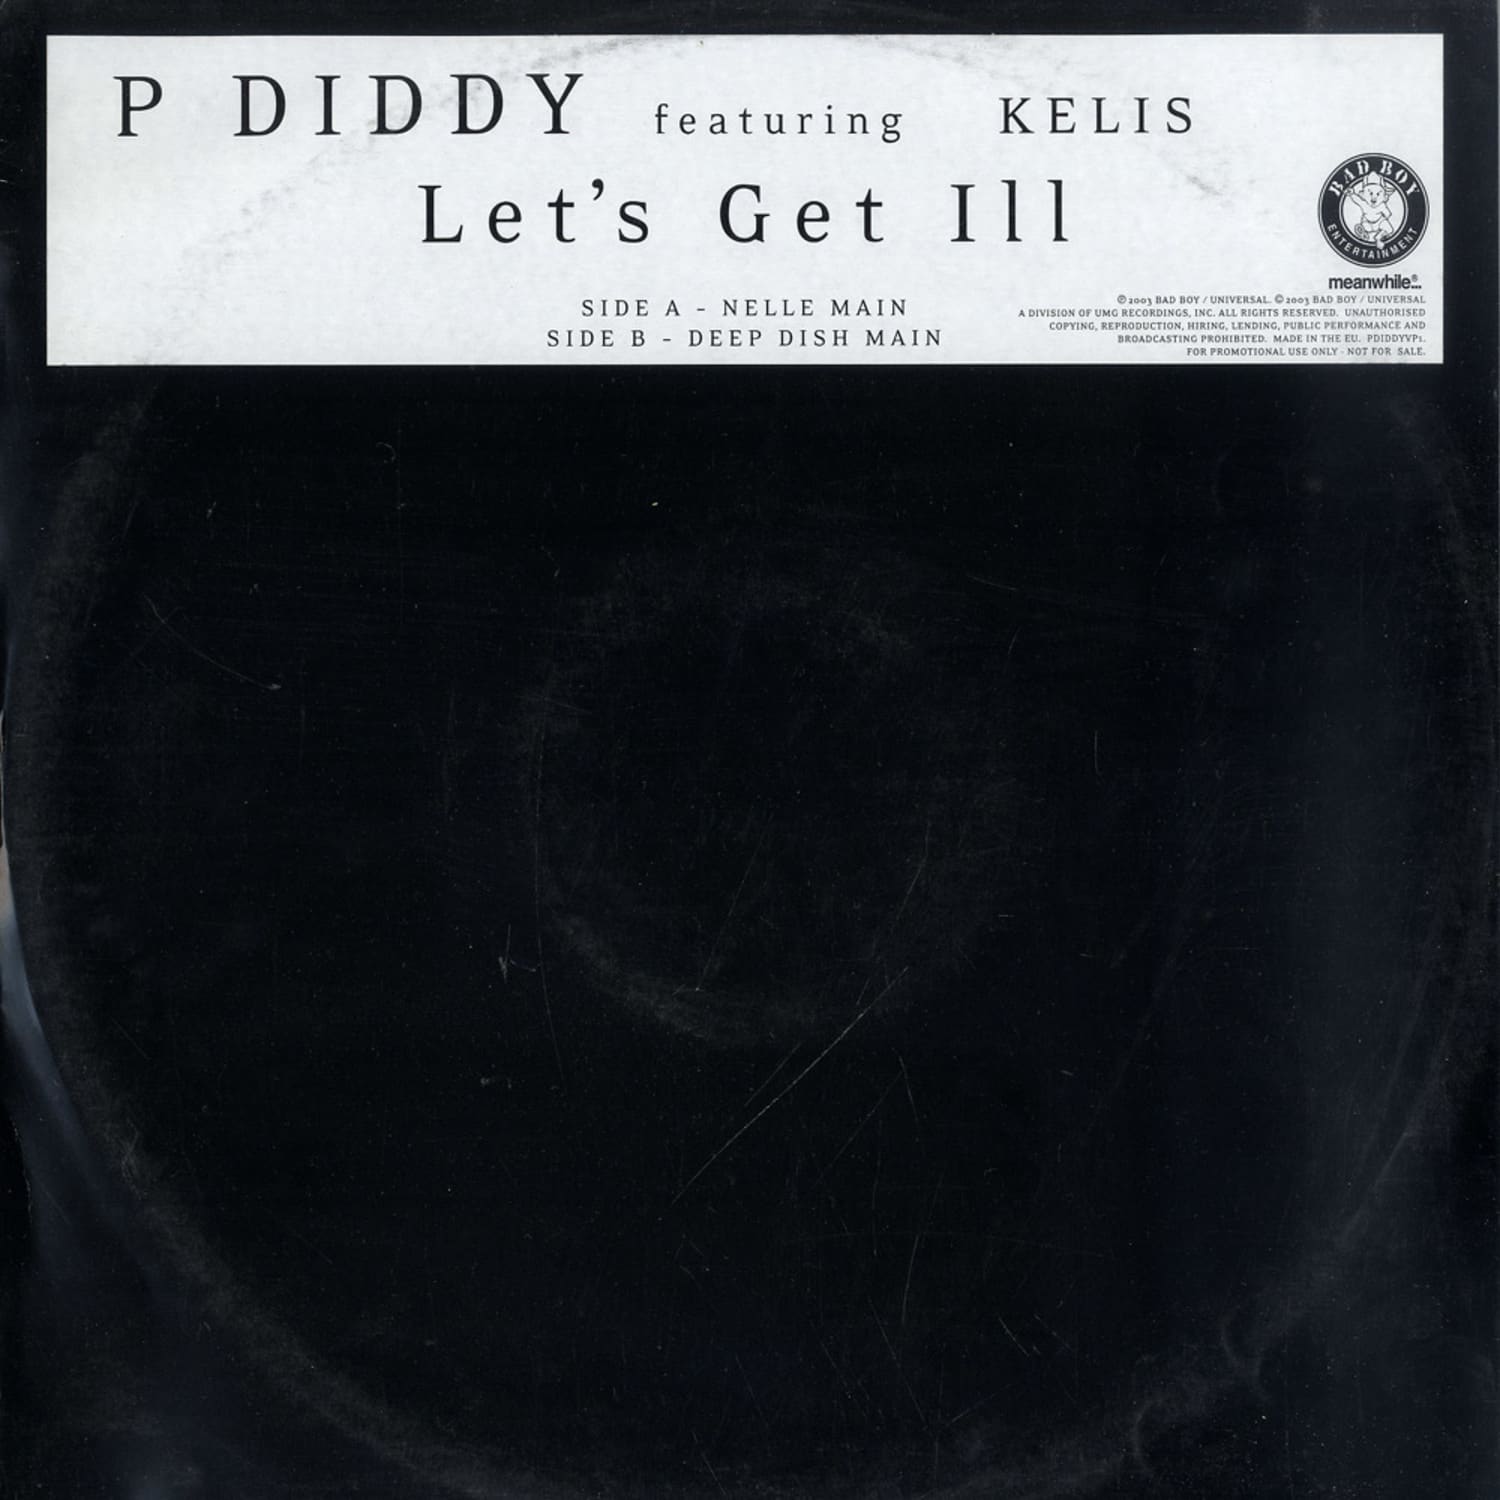 P Diddy ft. Kelis - LETS GET ILL